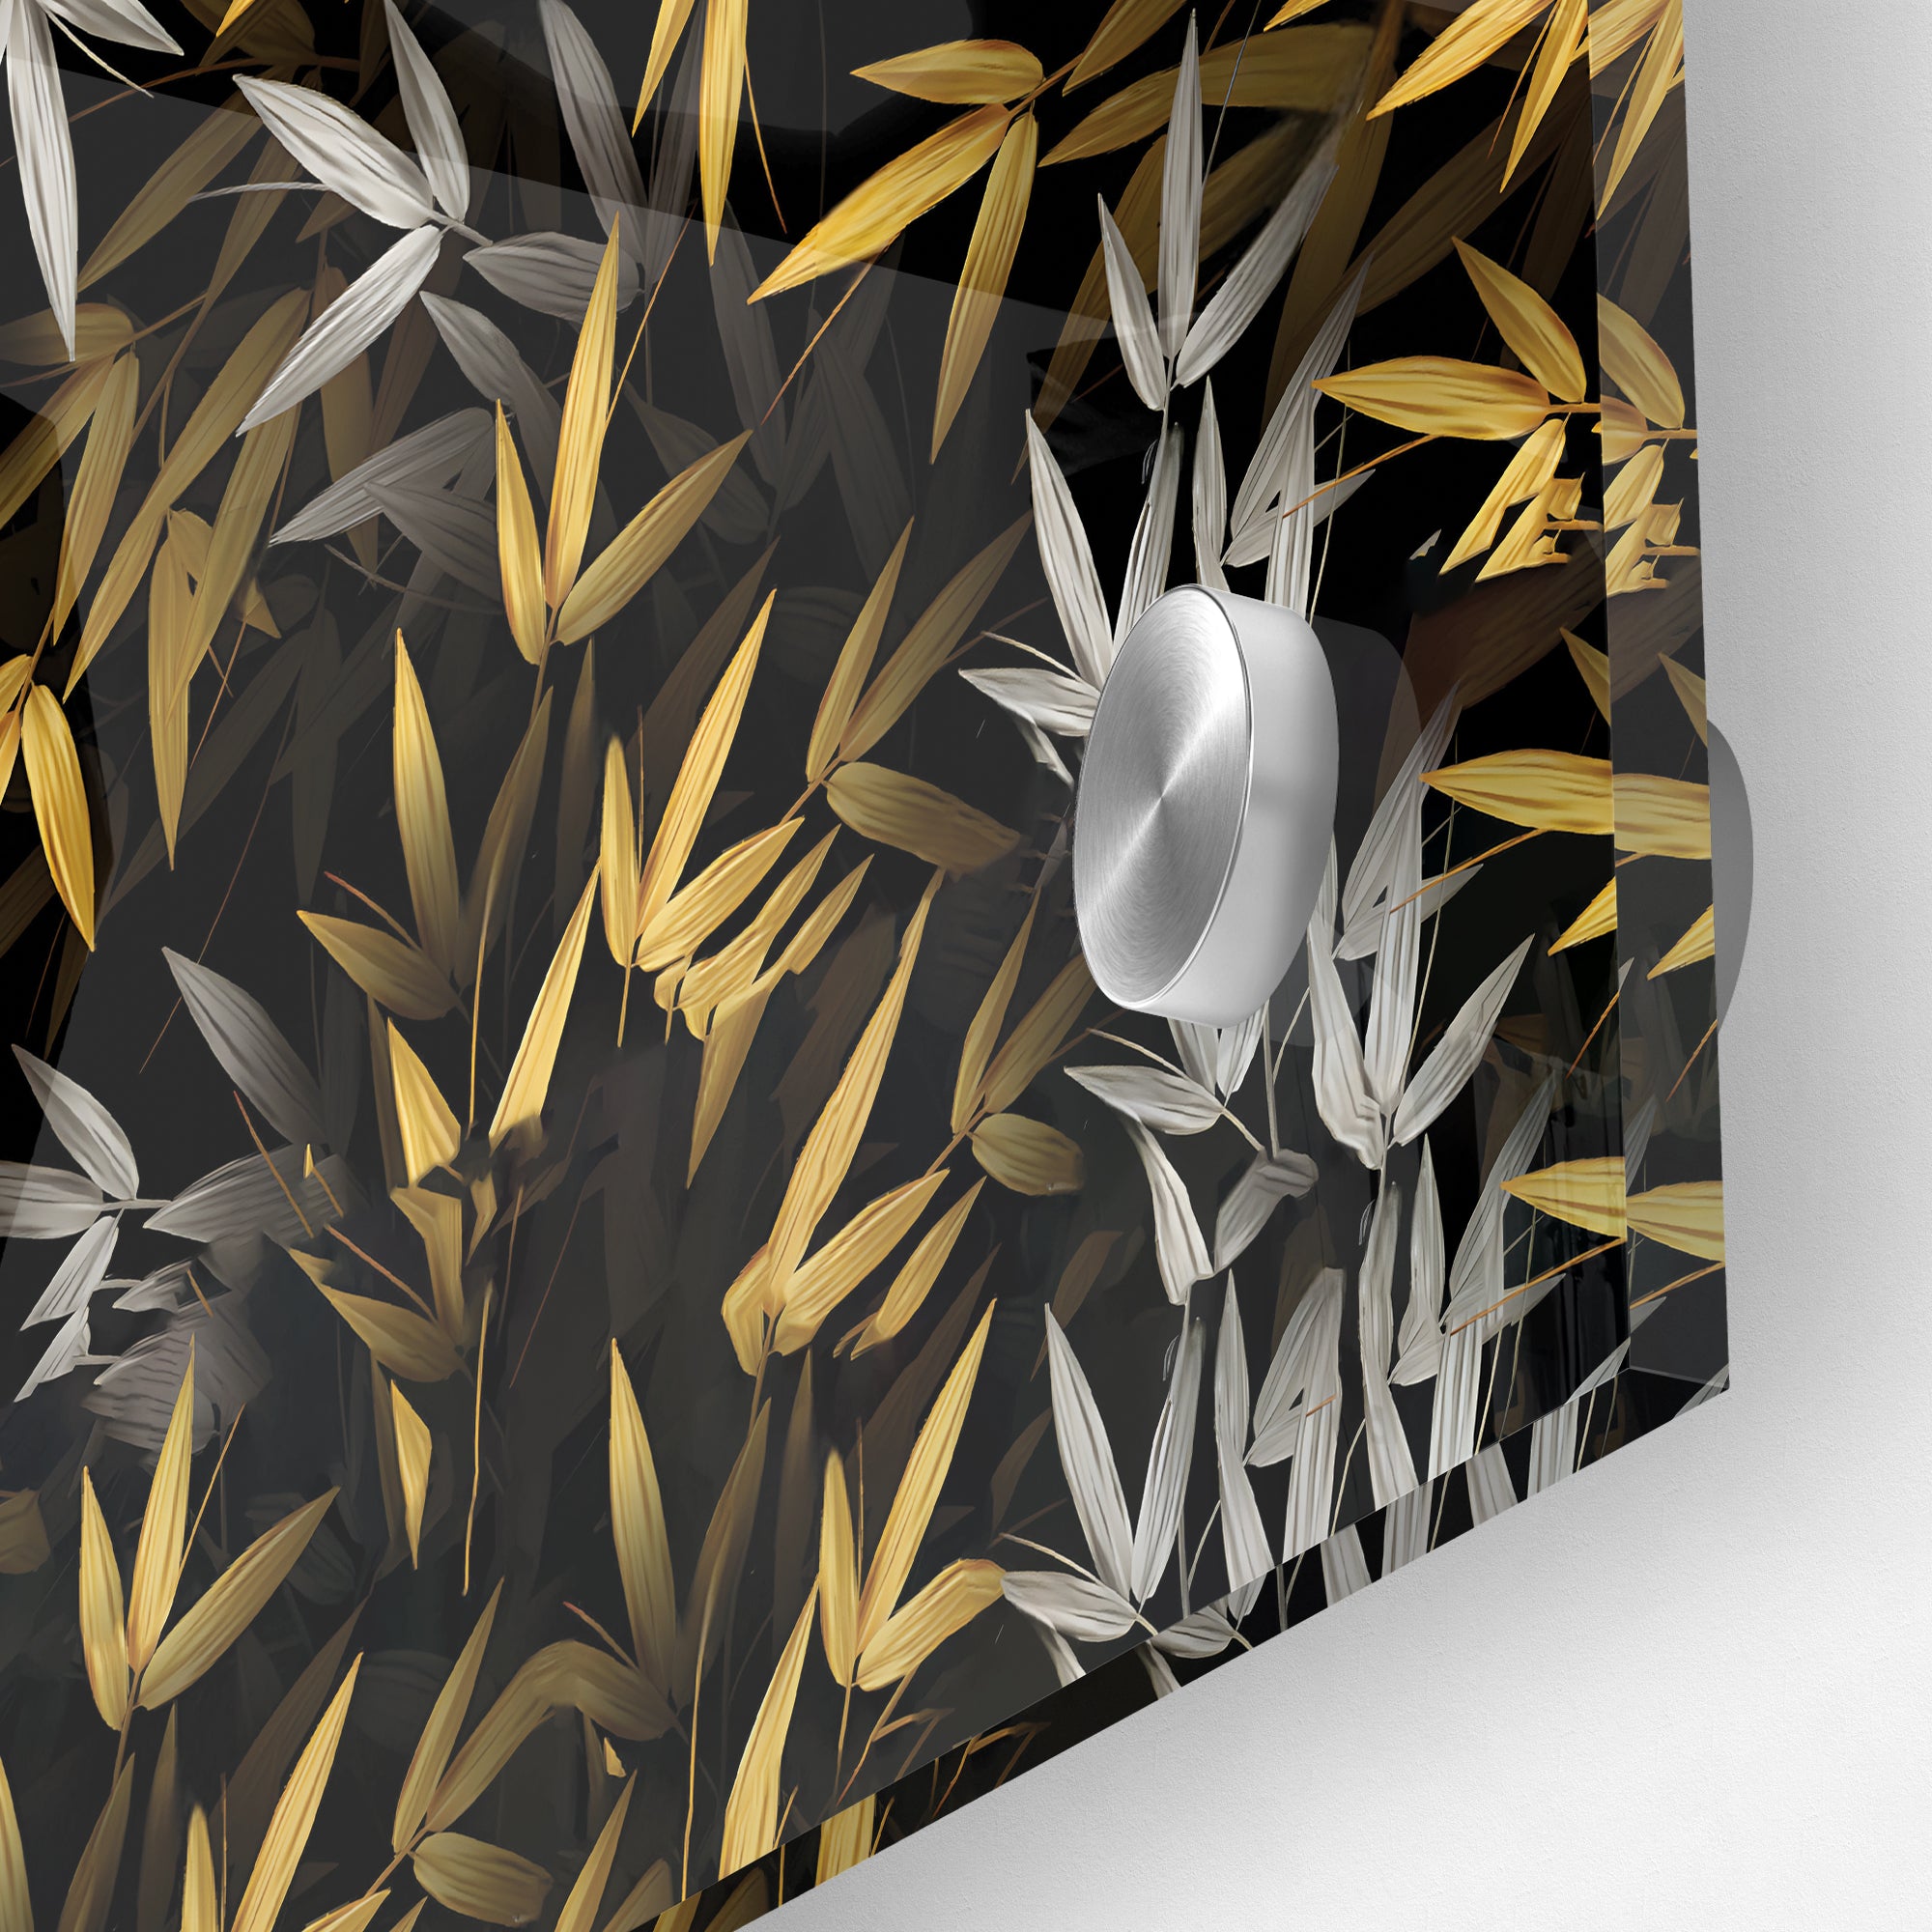 Golden Bamboo Leaves Morden Art Acrylic Painting